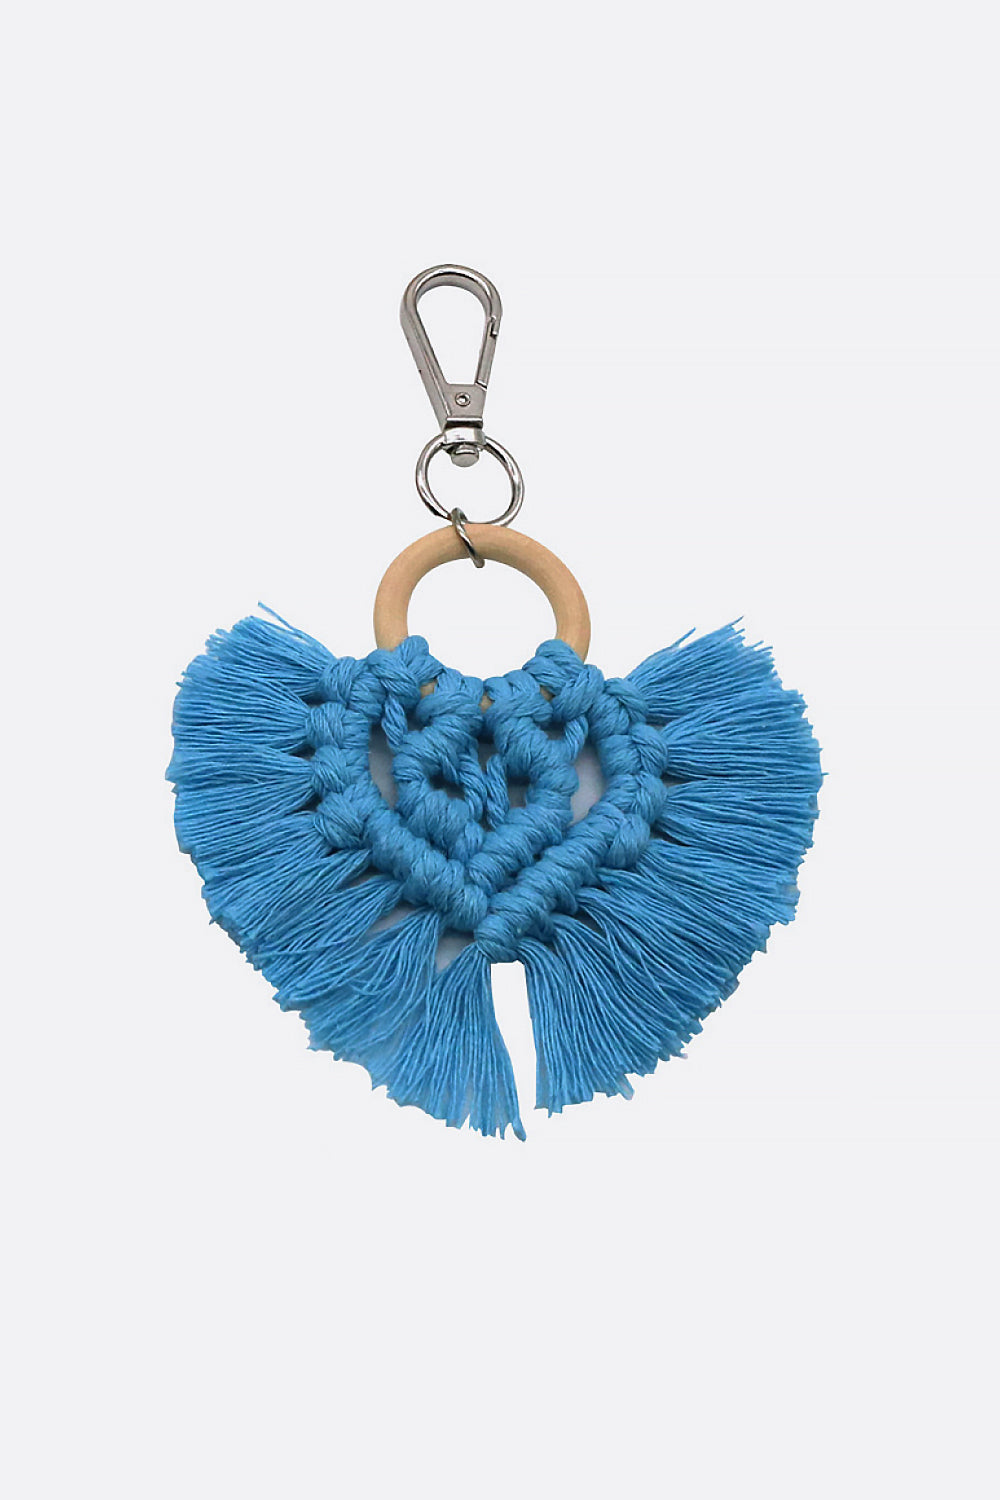 Trendsi Cupid Beauty Supplies Keychains Assorted 4-Pack Heart-Shaped Macrame Fringe Keychain